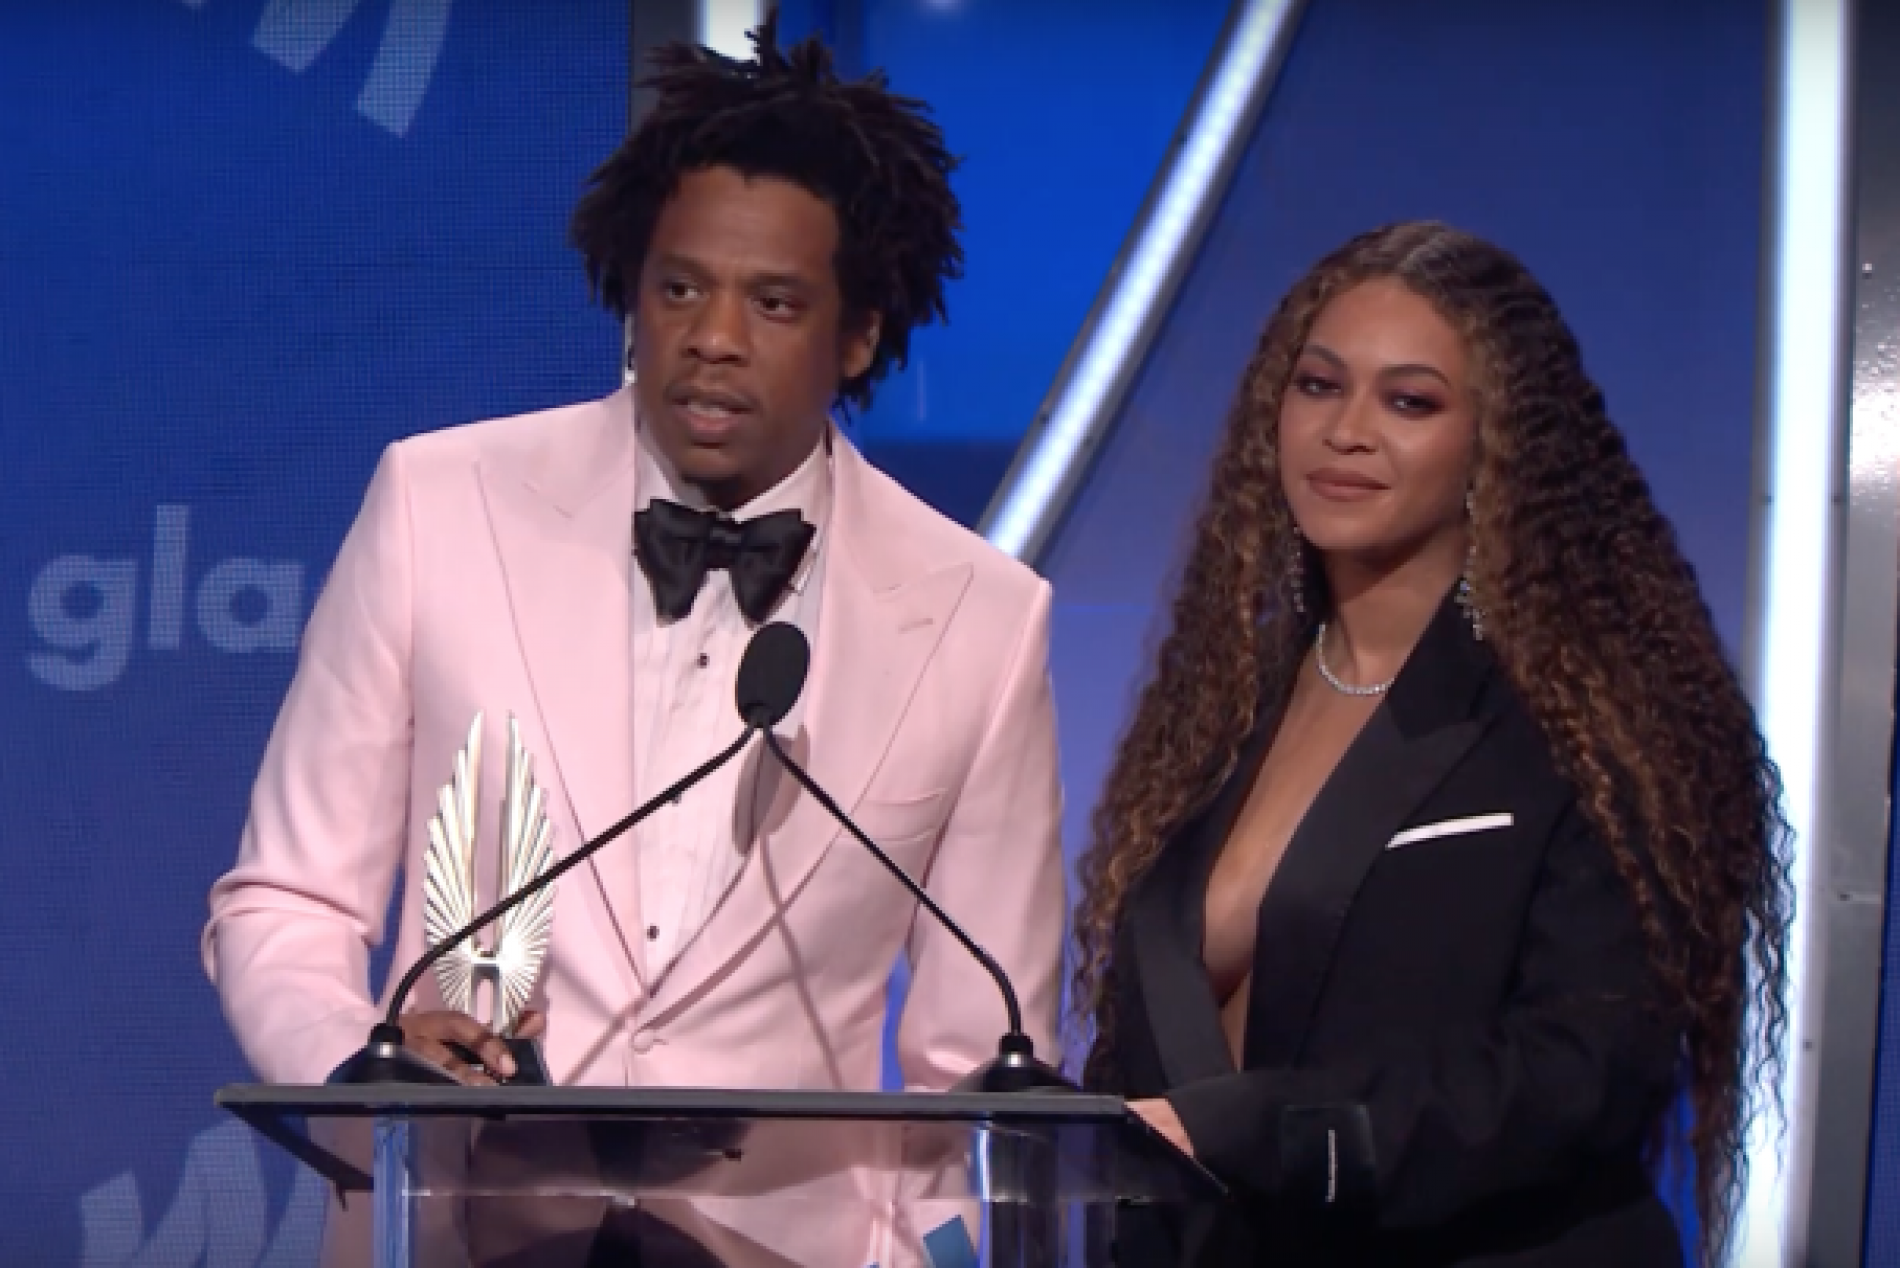 Beyoncé Reveals She Lost Her Gay Uncle To HIV In Emotional Speech At The GLAAD Media Awards